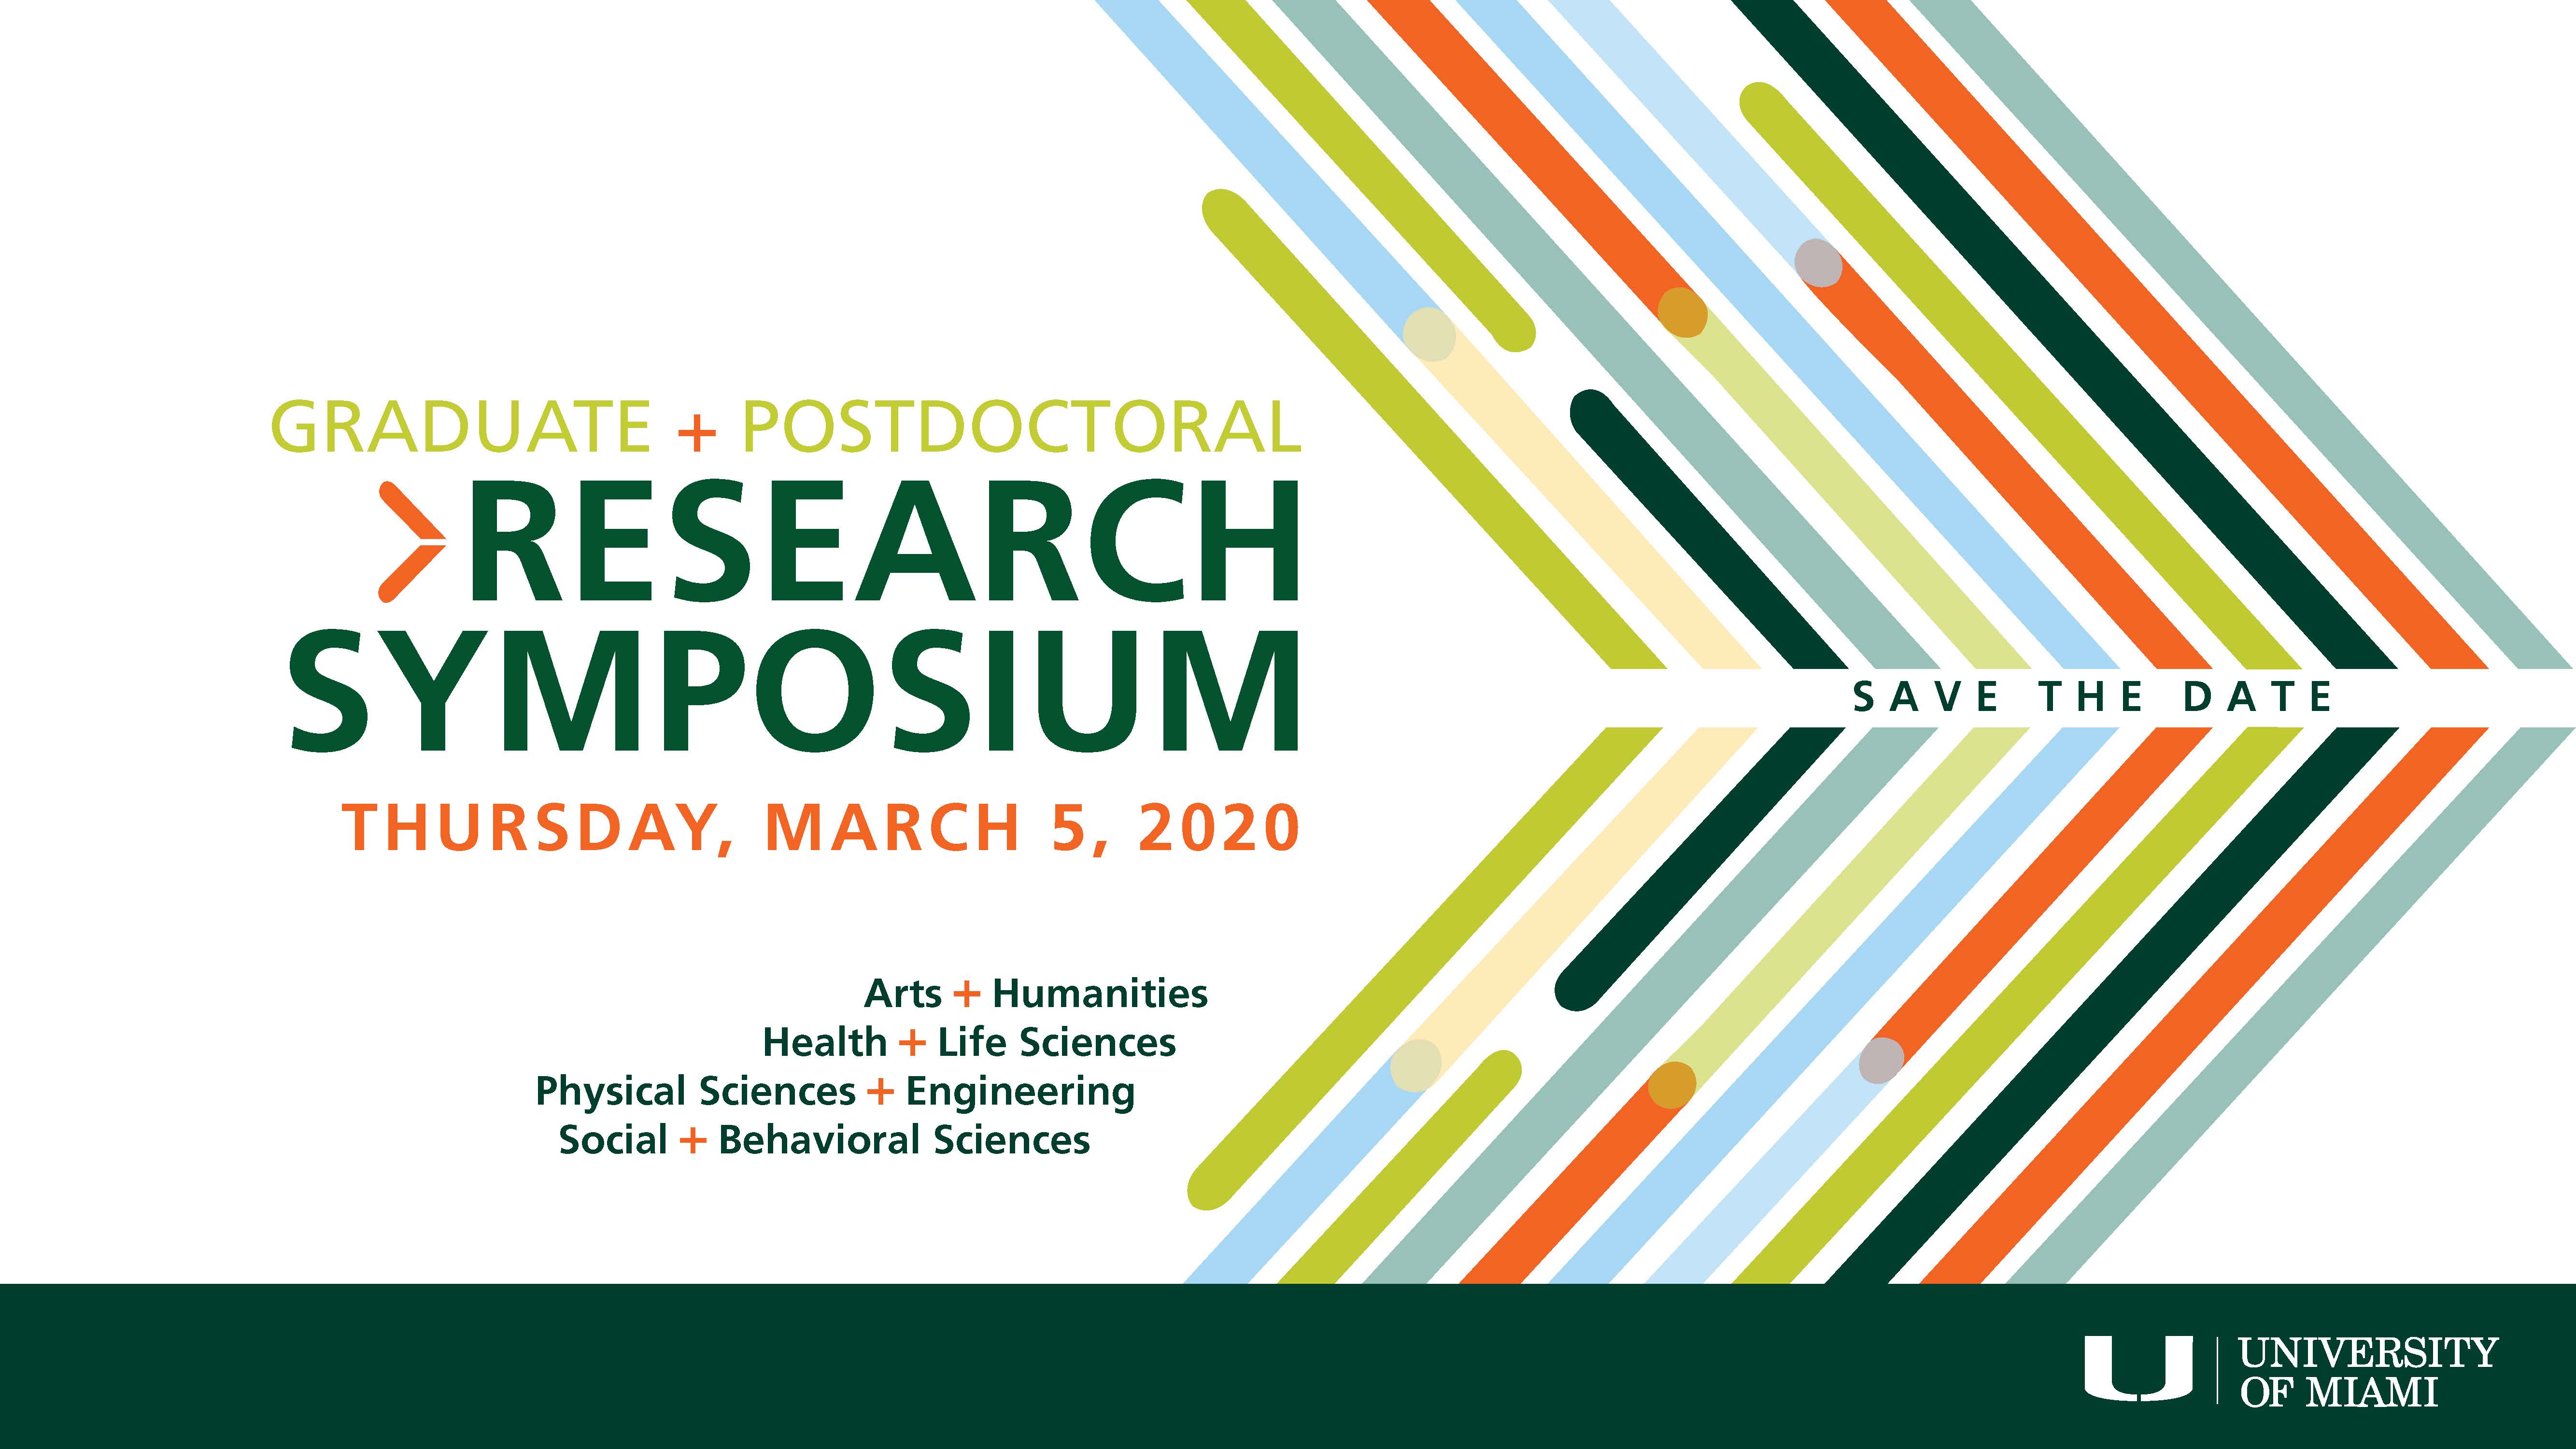 Agenda and Keynote Speaker for the Graduate and Postdoctoral Research Symposium Announced!